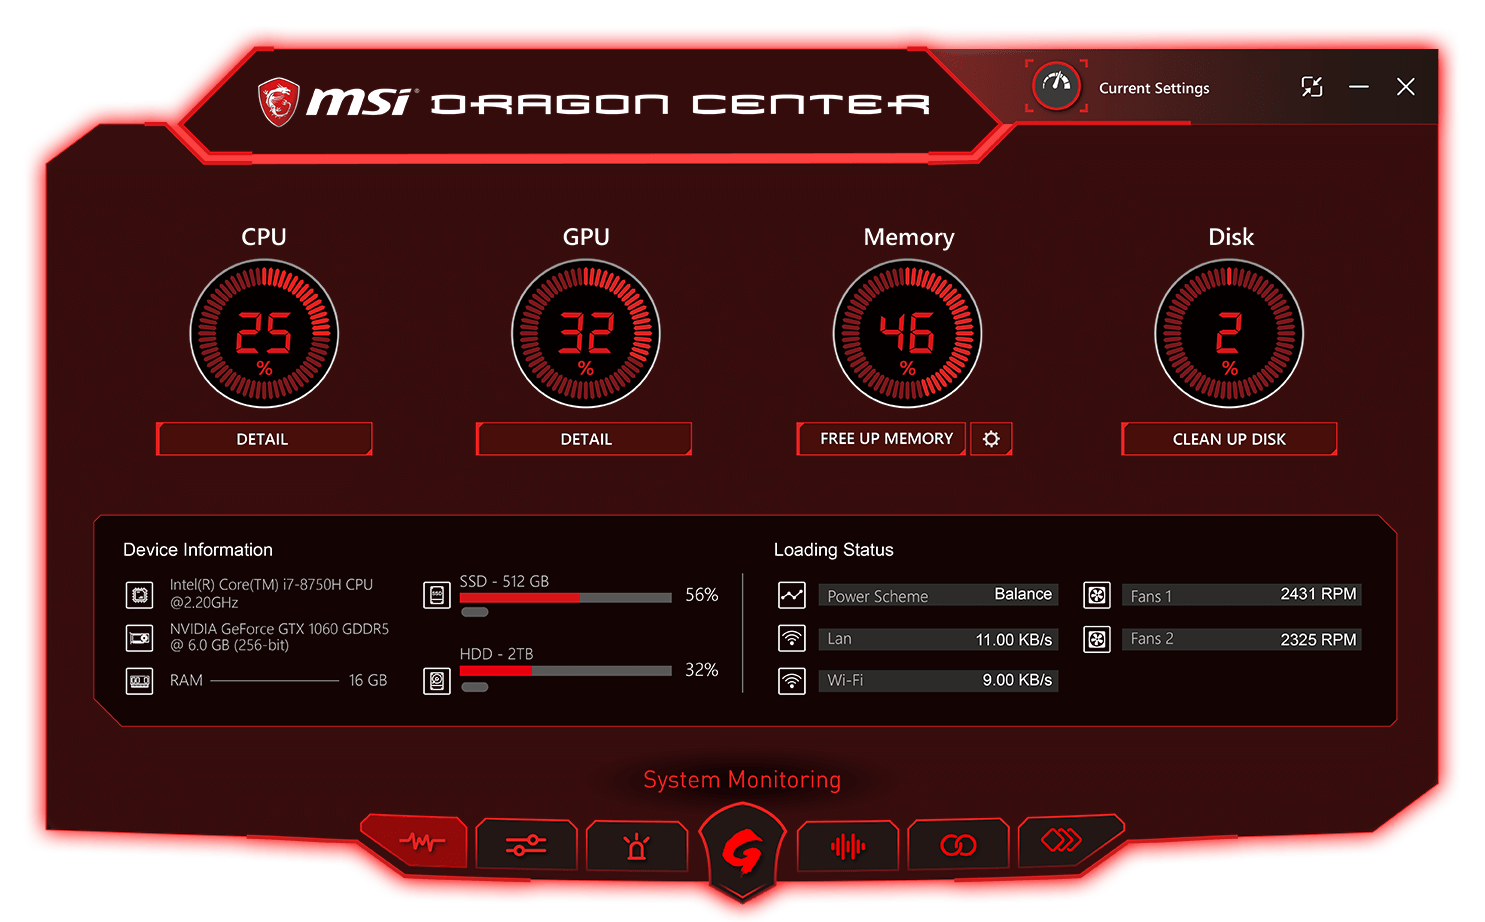 MSI GS63 8RD-006VN Stealth